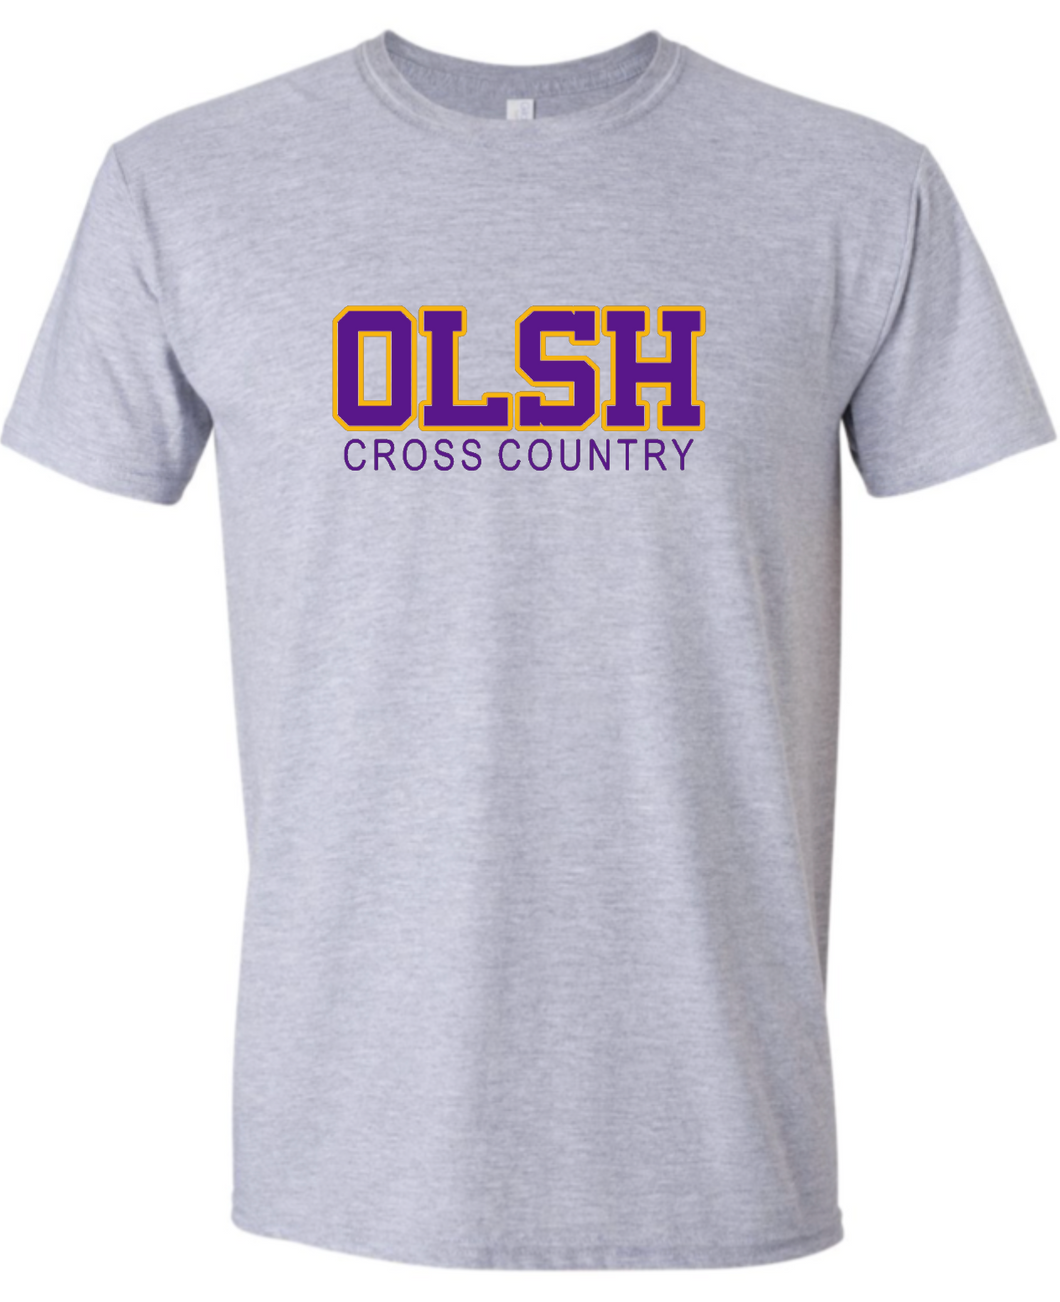 OLSH CROSS COUNTRY YOUTH & ADULT SOFTSTYLE COTTON JERSEY SHORT SLEEVE T-SHIRT  - SPORT GREY